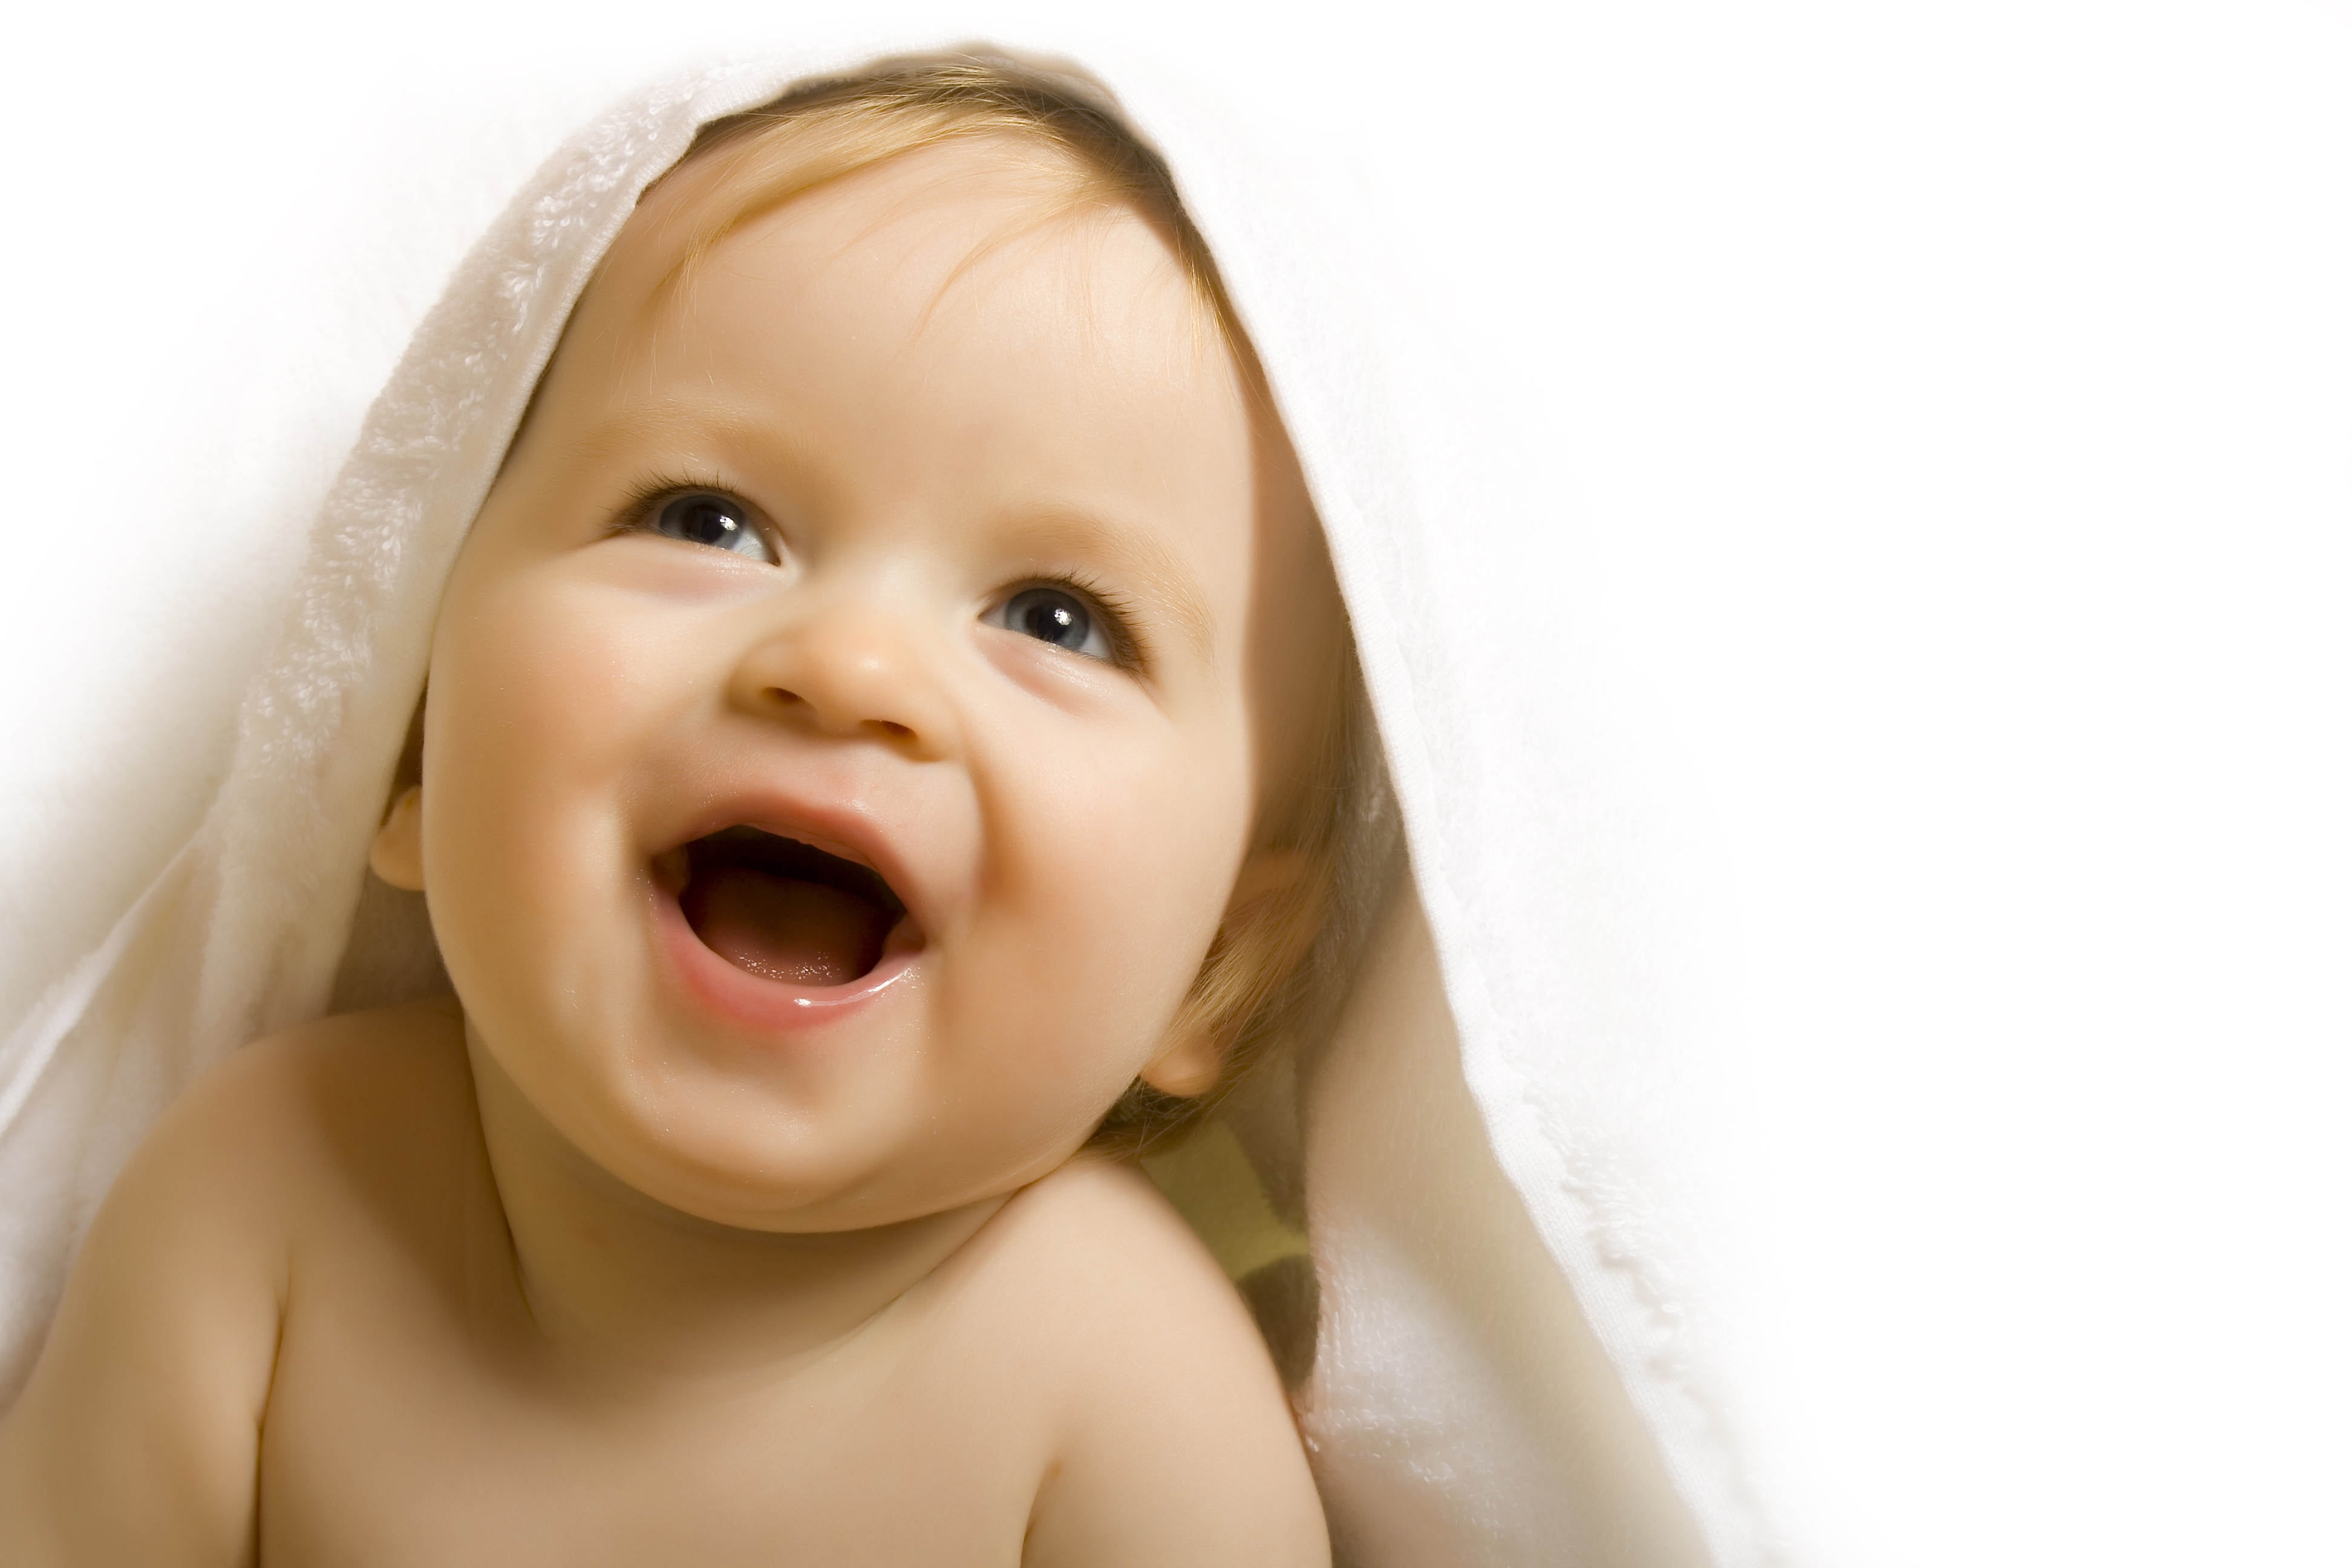 Baby On White Comfoter Hd Wallpaper Wallpaper Flare